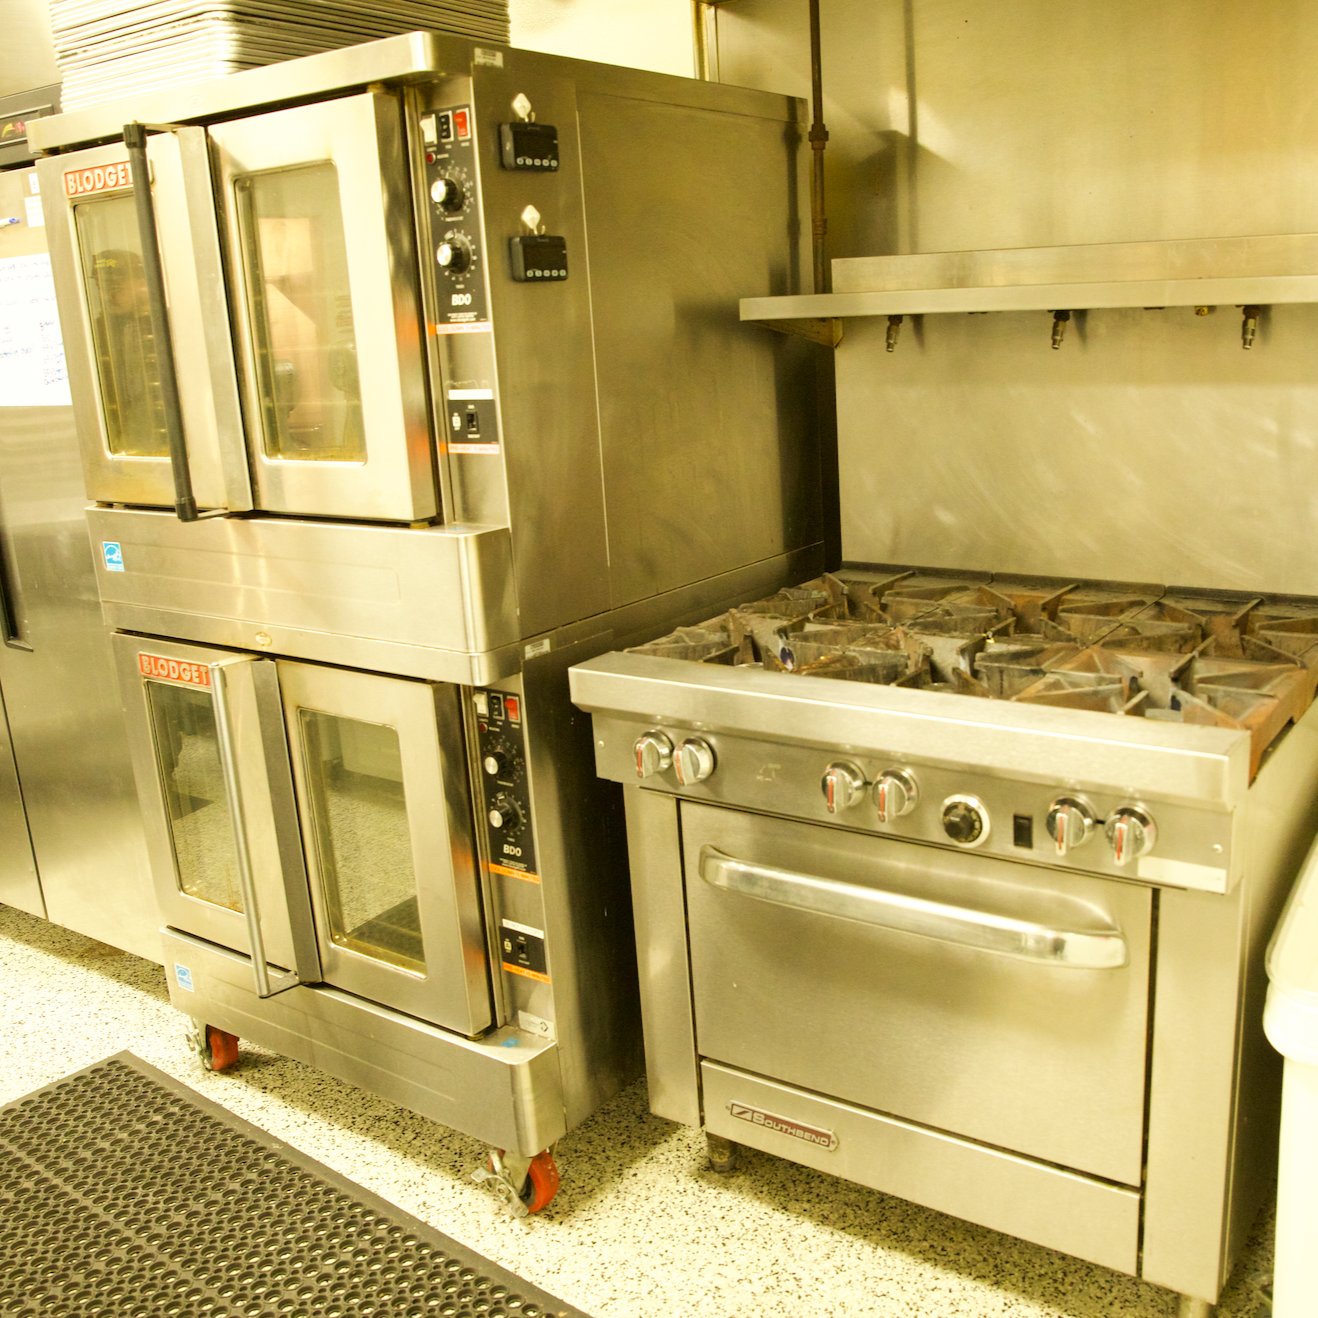  Commercial ovens